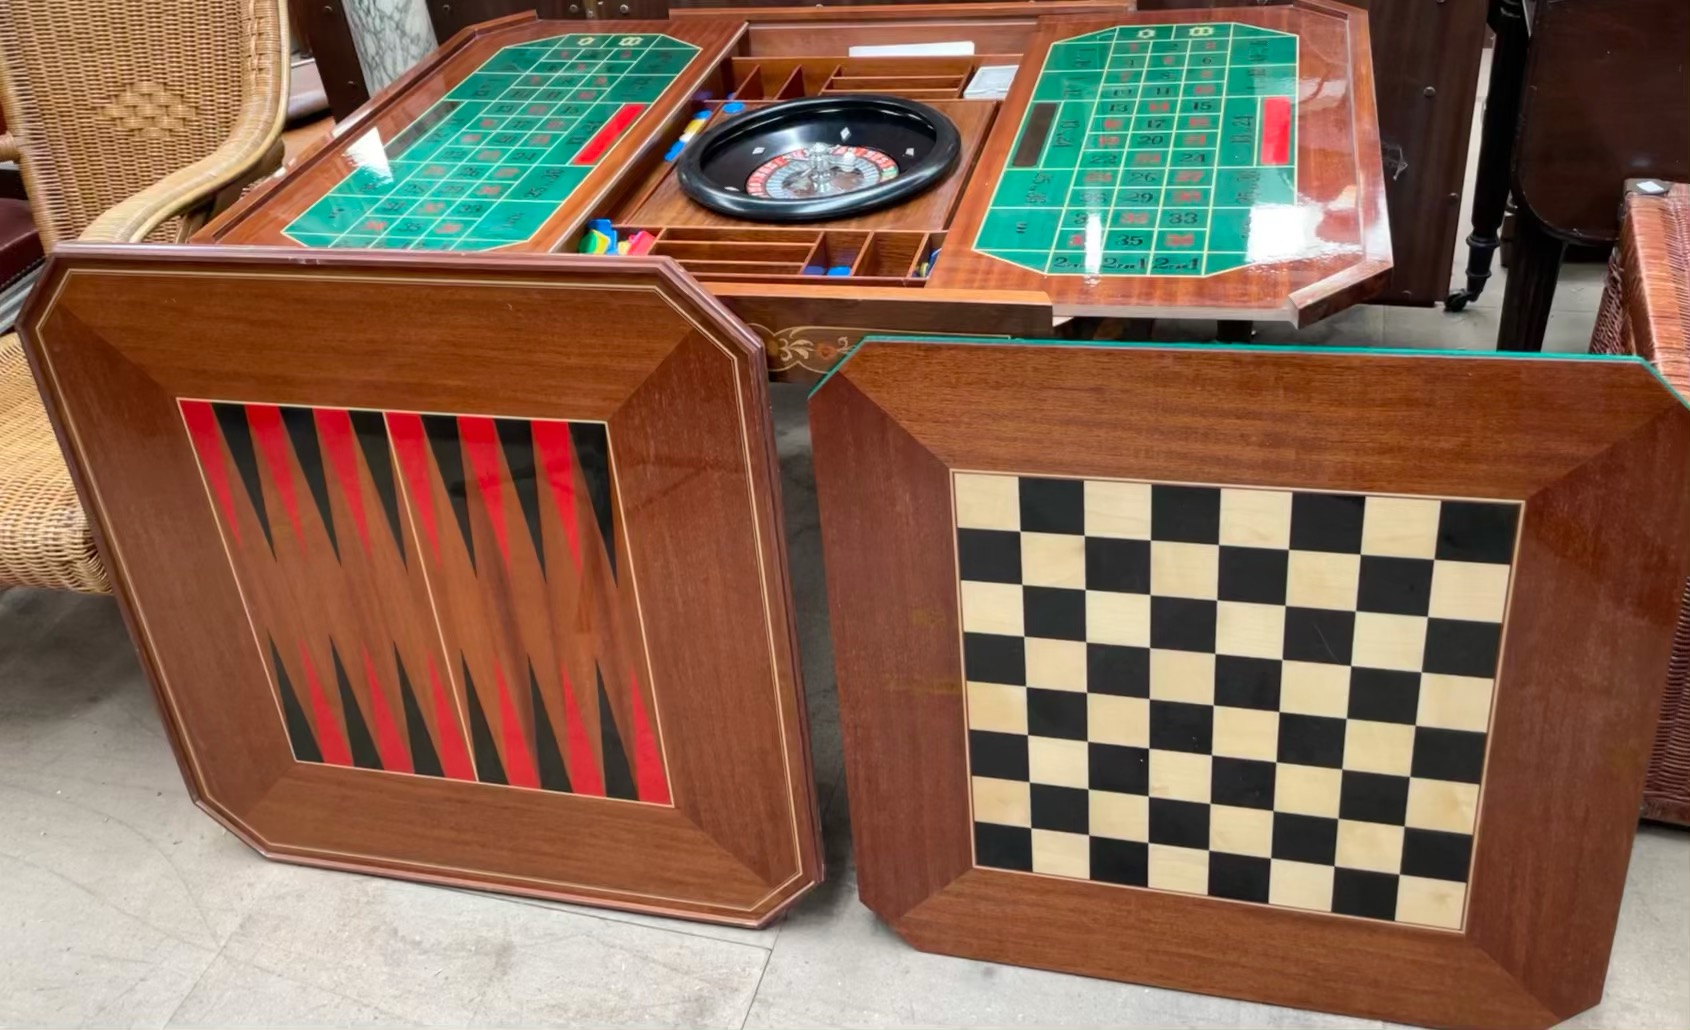 An inlaid Italian games table, with a removable top, revealing a backgammon board, chess board, - Bild 2 aus 2